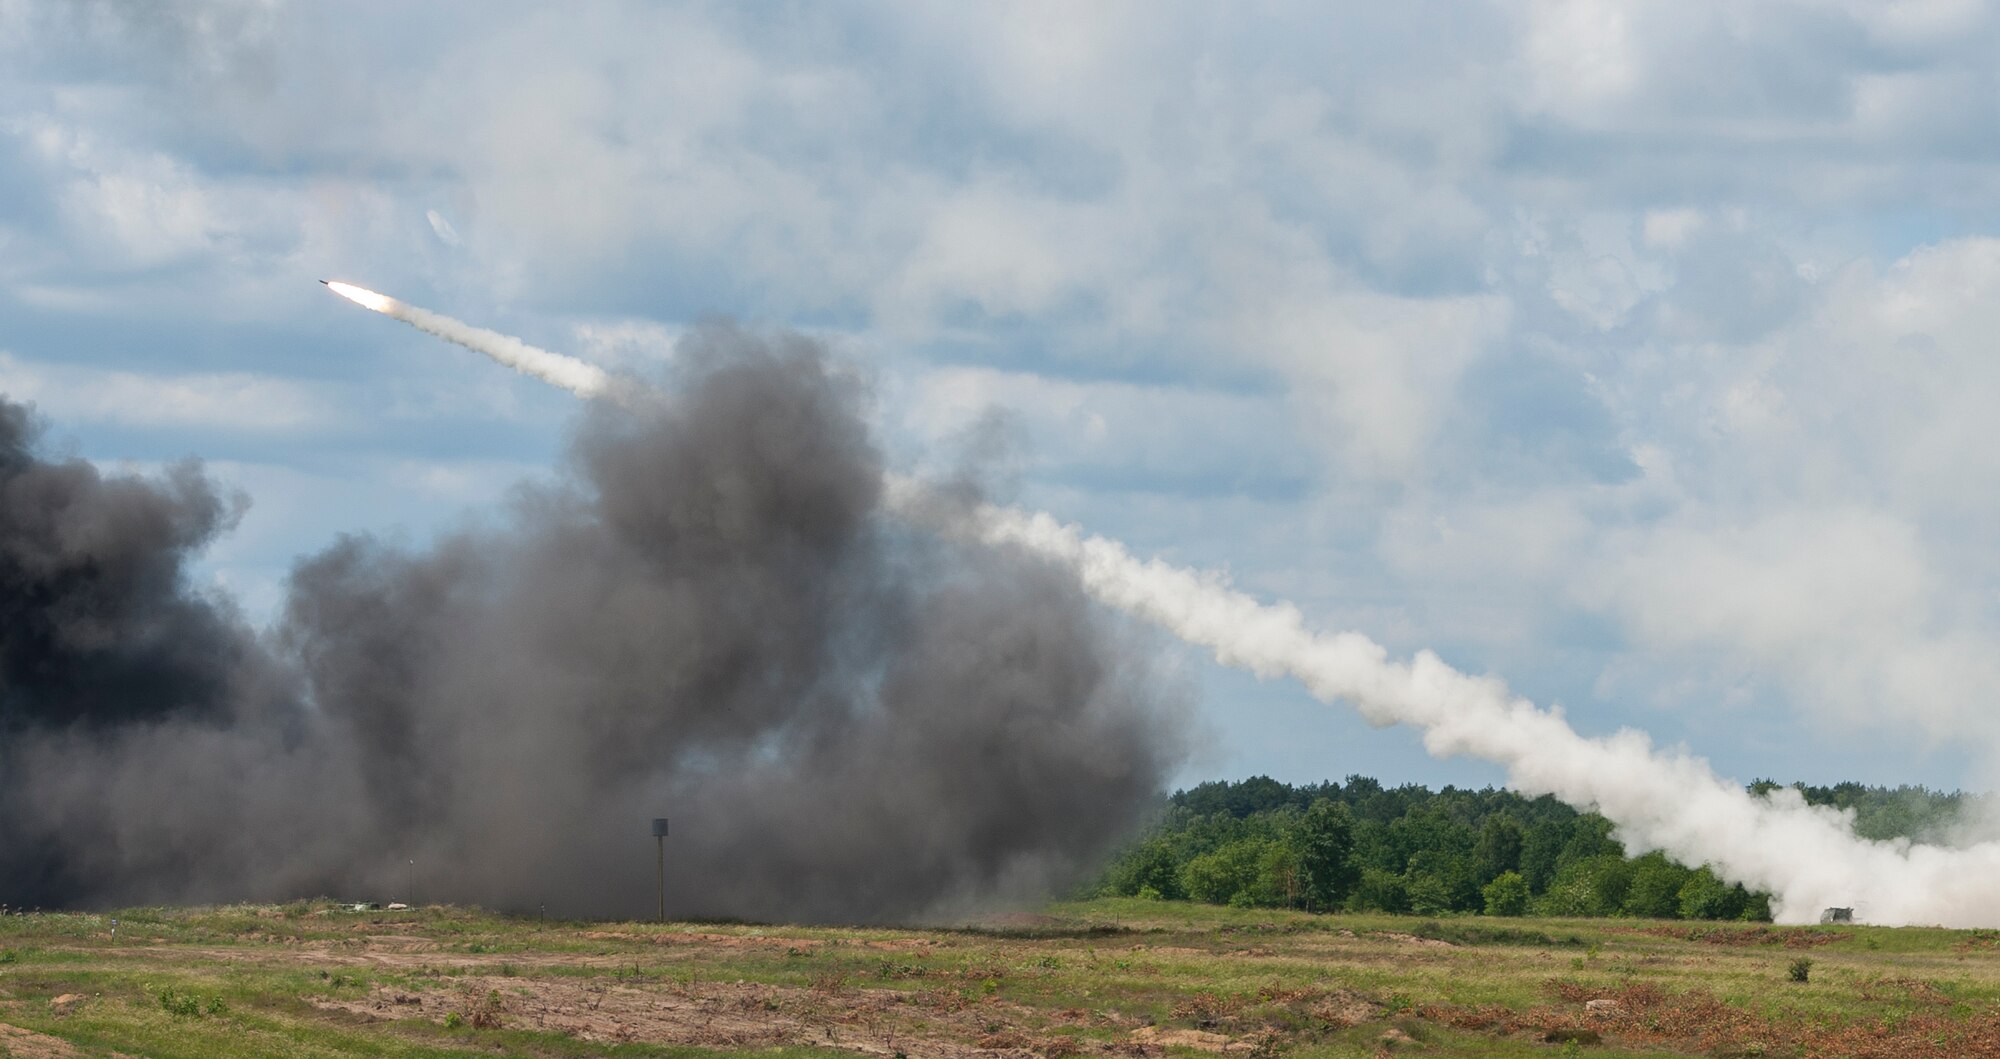 A surface-to-air missile is fired as part of a live-fire event during exercise Anakonda 2016 June 16, 2016, in Poland. The event was an opportunity for U.S. Airmen to train alongside allies and test aircraft, vehicles and other equipment in a live-fire exercise. The event served as a wrap up for Anakonda 2016, a Polish-led international exercise that aimed to train, exercise and integrate Poland and its allied forces by demonstrating their defense capabilities to deploy in mass numbers and sustain combat power. (U.S. Air Force photo/Airman 1st Class Lane T. Plummer)